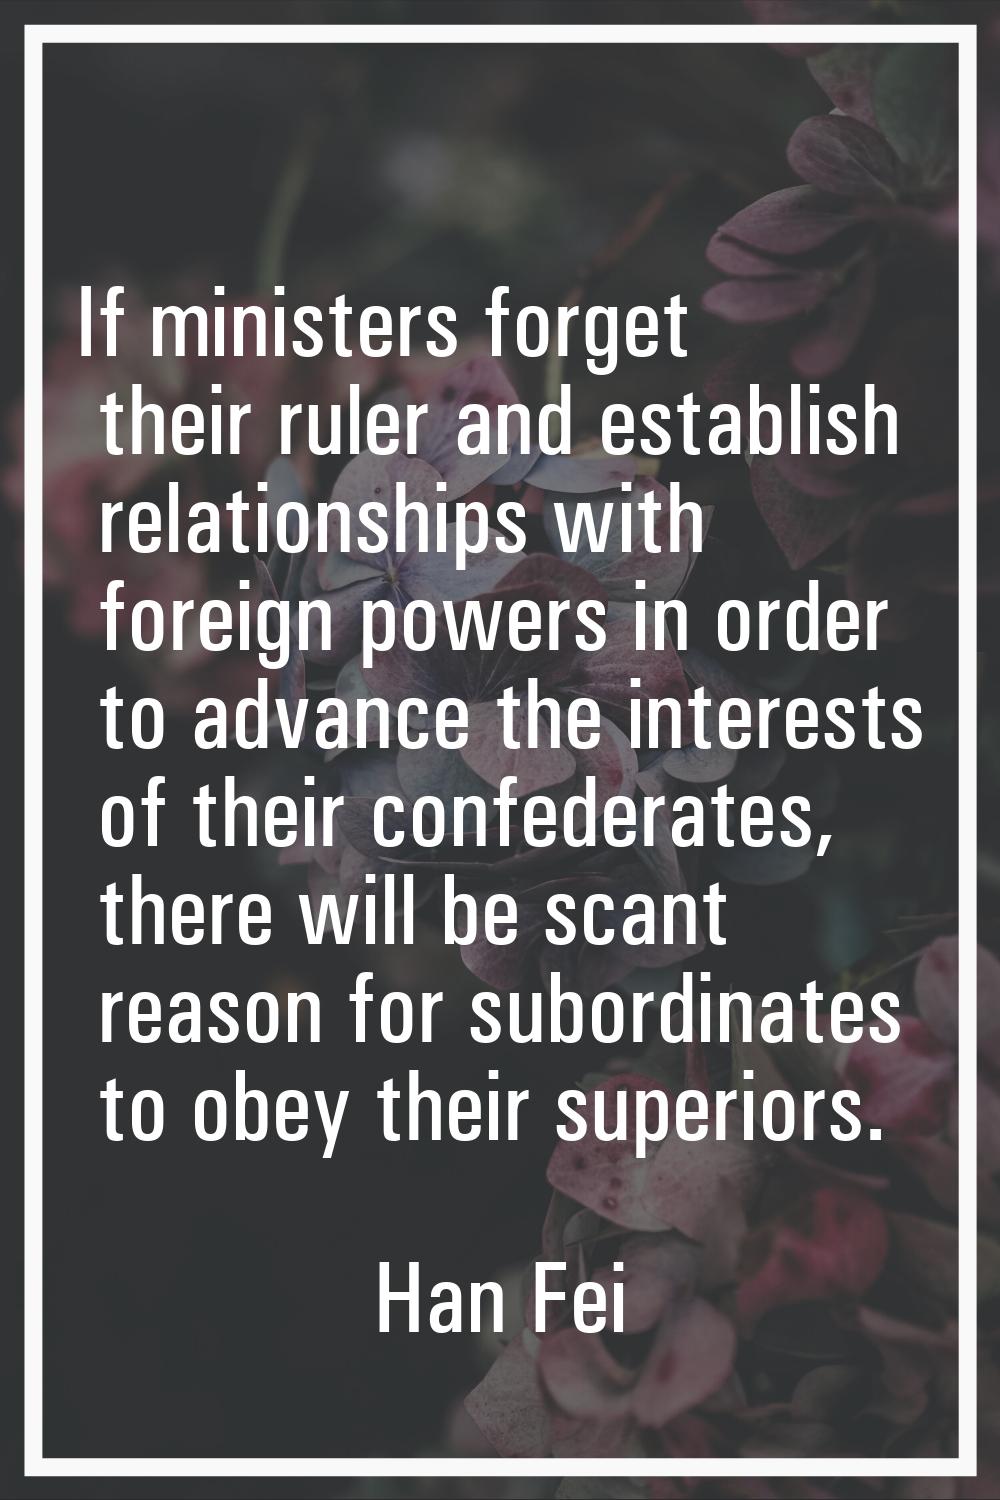 If ministers forget their ruler and establish relationships with foreign powers in order to advance